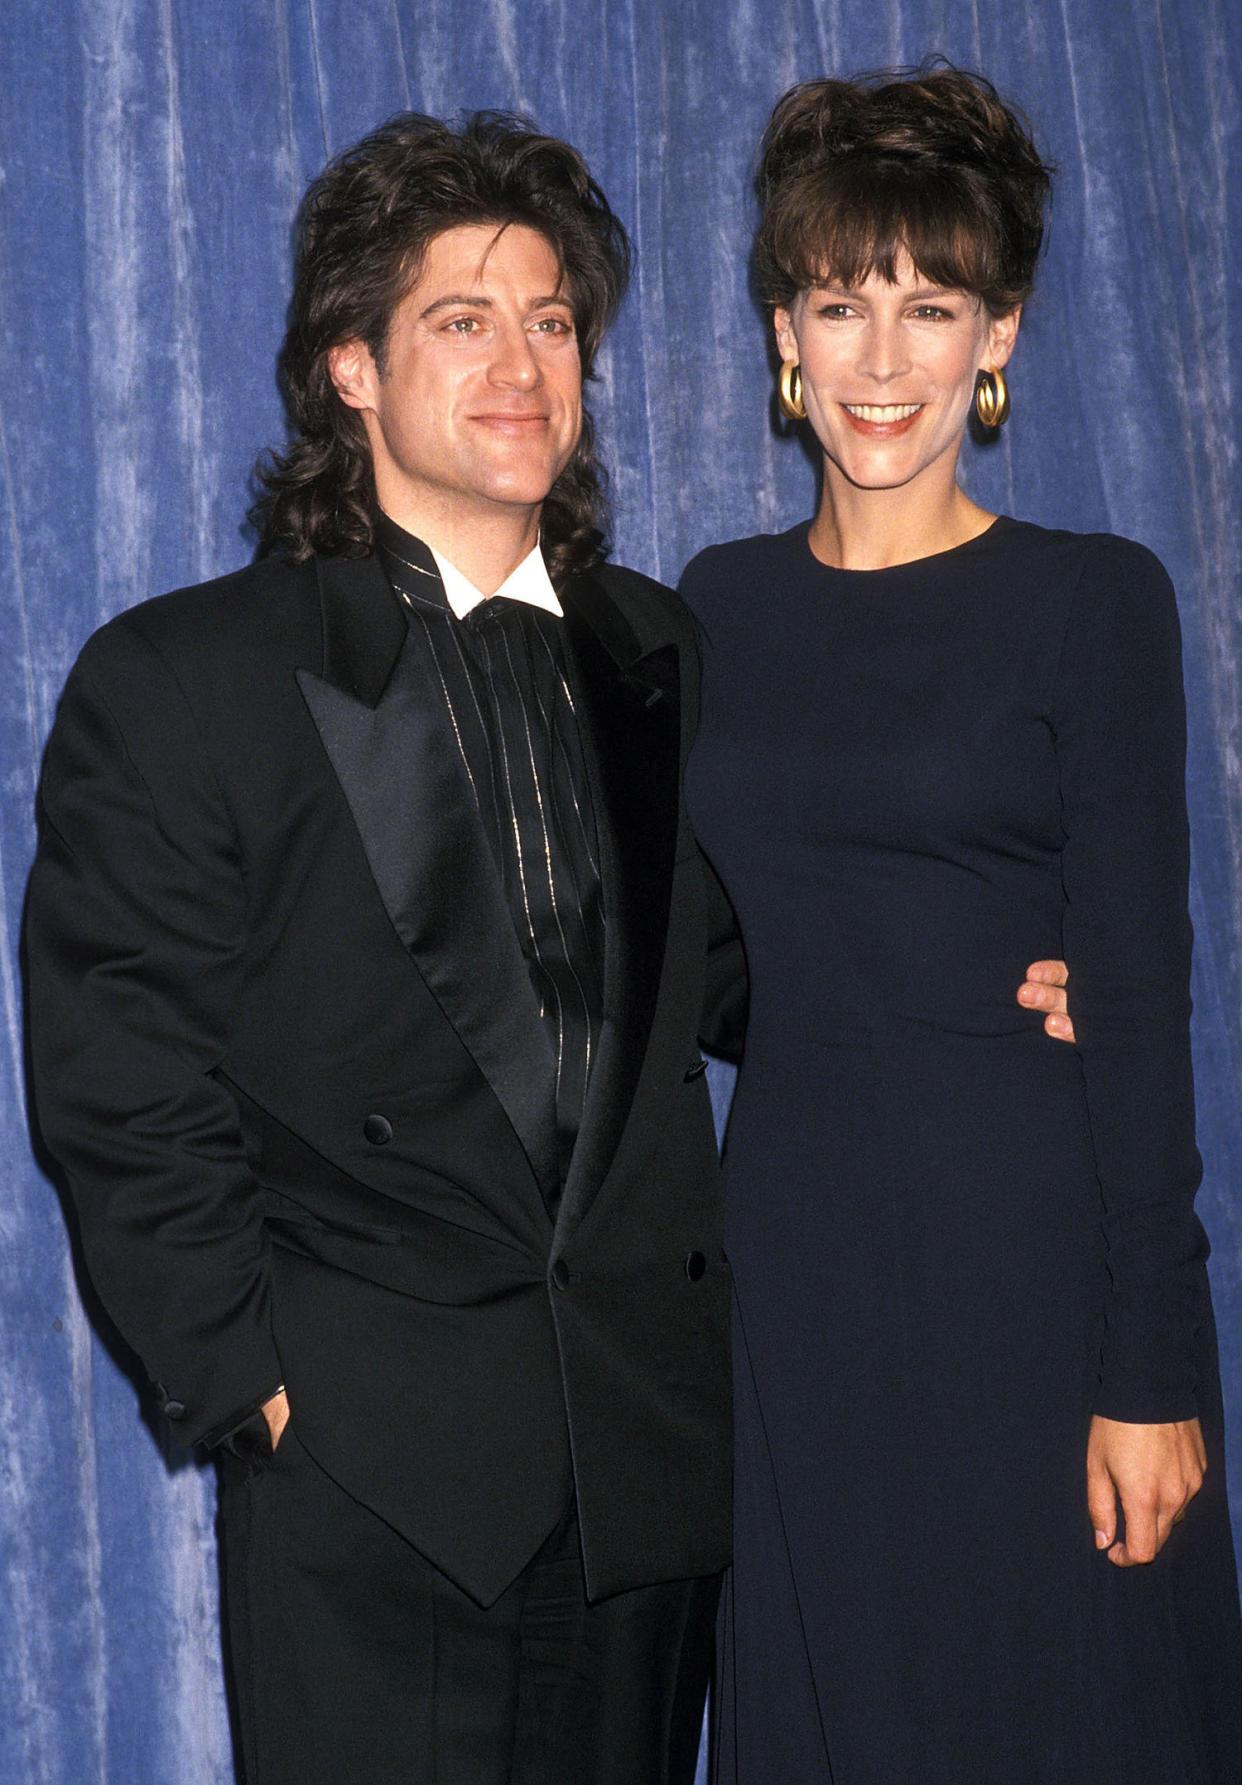 Actor Richard Lewis and actress Jamie Lee Curtis attend the 41st Annual Primetime Emmy Awards on September 17, 1989 at the Pasadena Civic Auditorium in Pasadena, California.  (Ron Galella Collection via Getty Images)